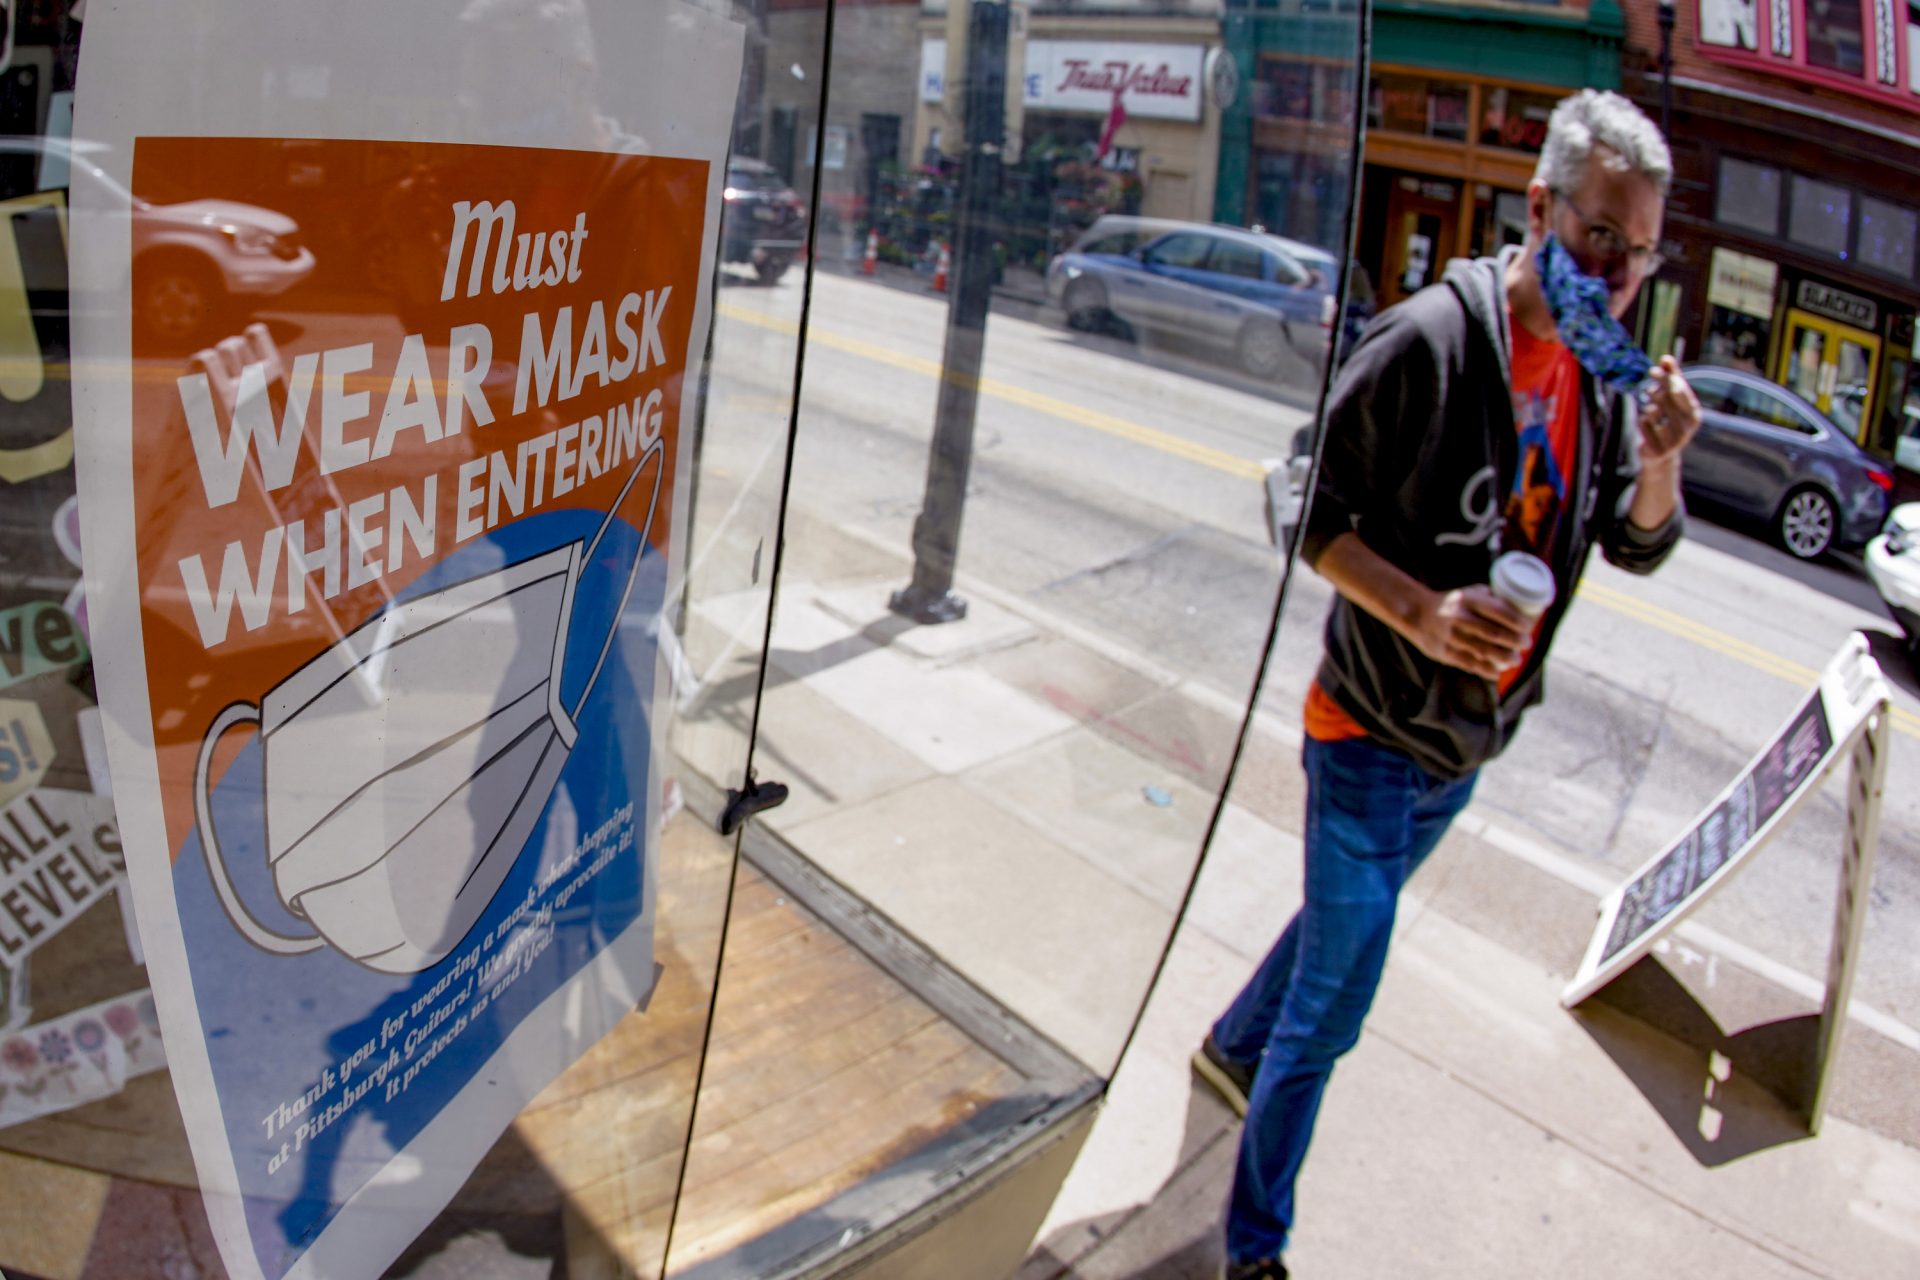 John Bechtold puts his face covering on as he passes his storefront sign that lists COVID-19 protective covering required to enter in his retail shop, Friday, May 14, 2021, in Pittsburgh's South Side neighborhood.